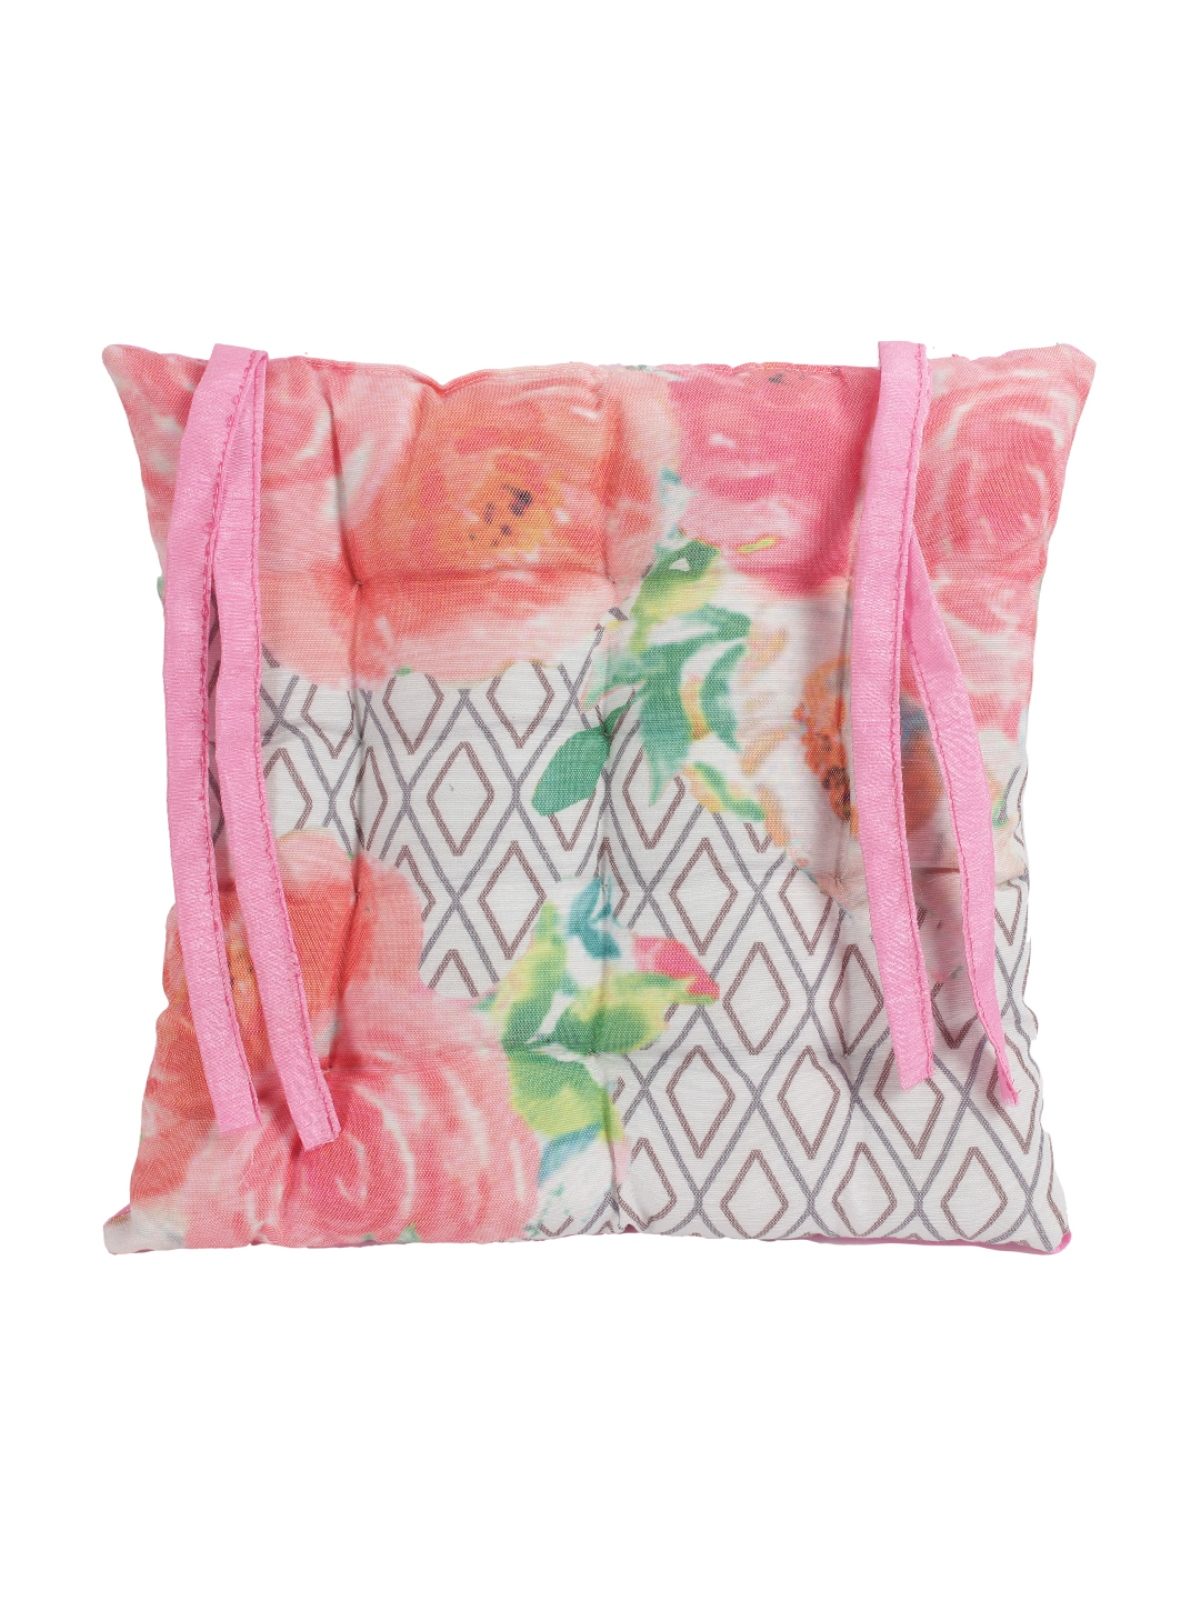 Pink & White Chair Pad Cushion Seat Floral Printed - Set of 2, 40 cm x 40 cm